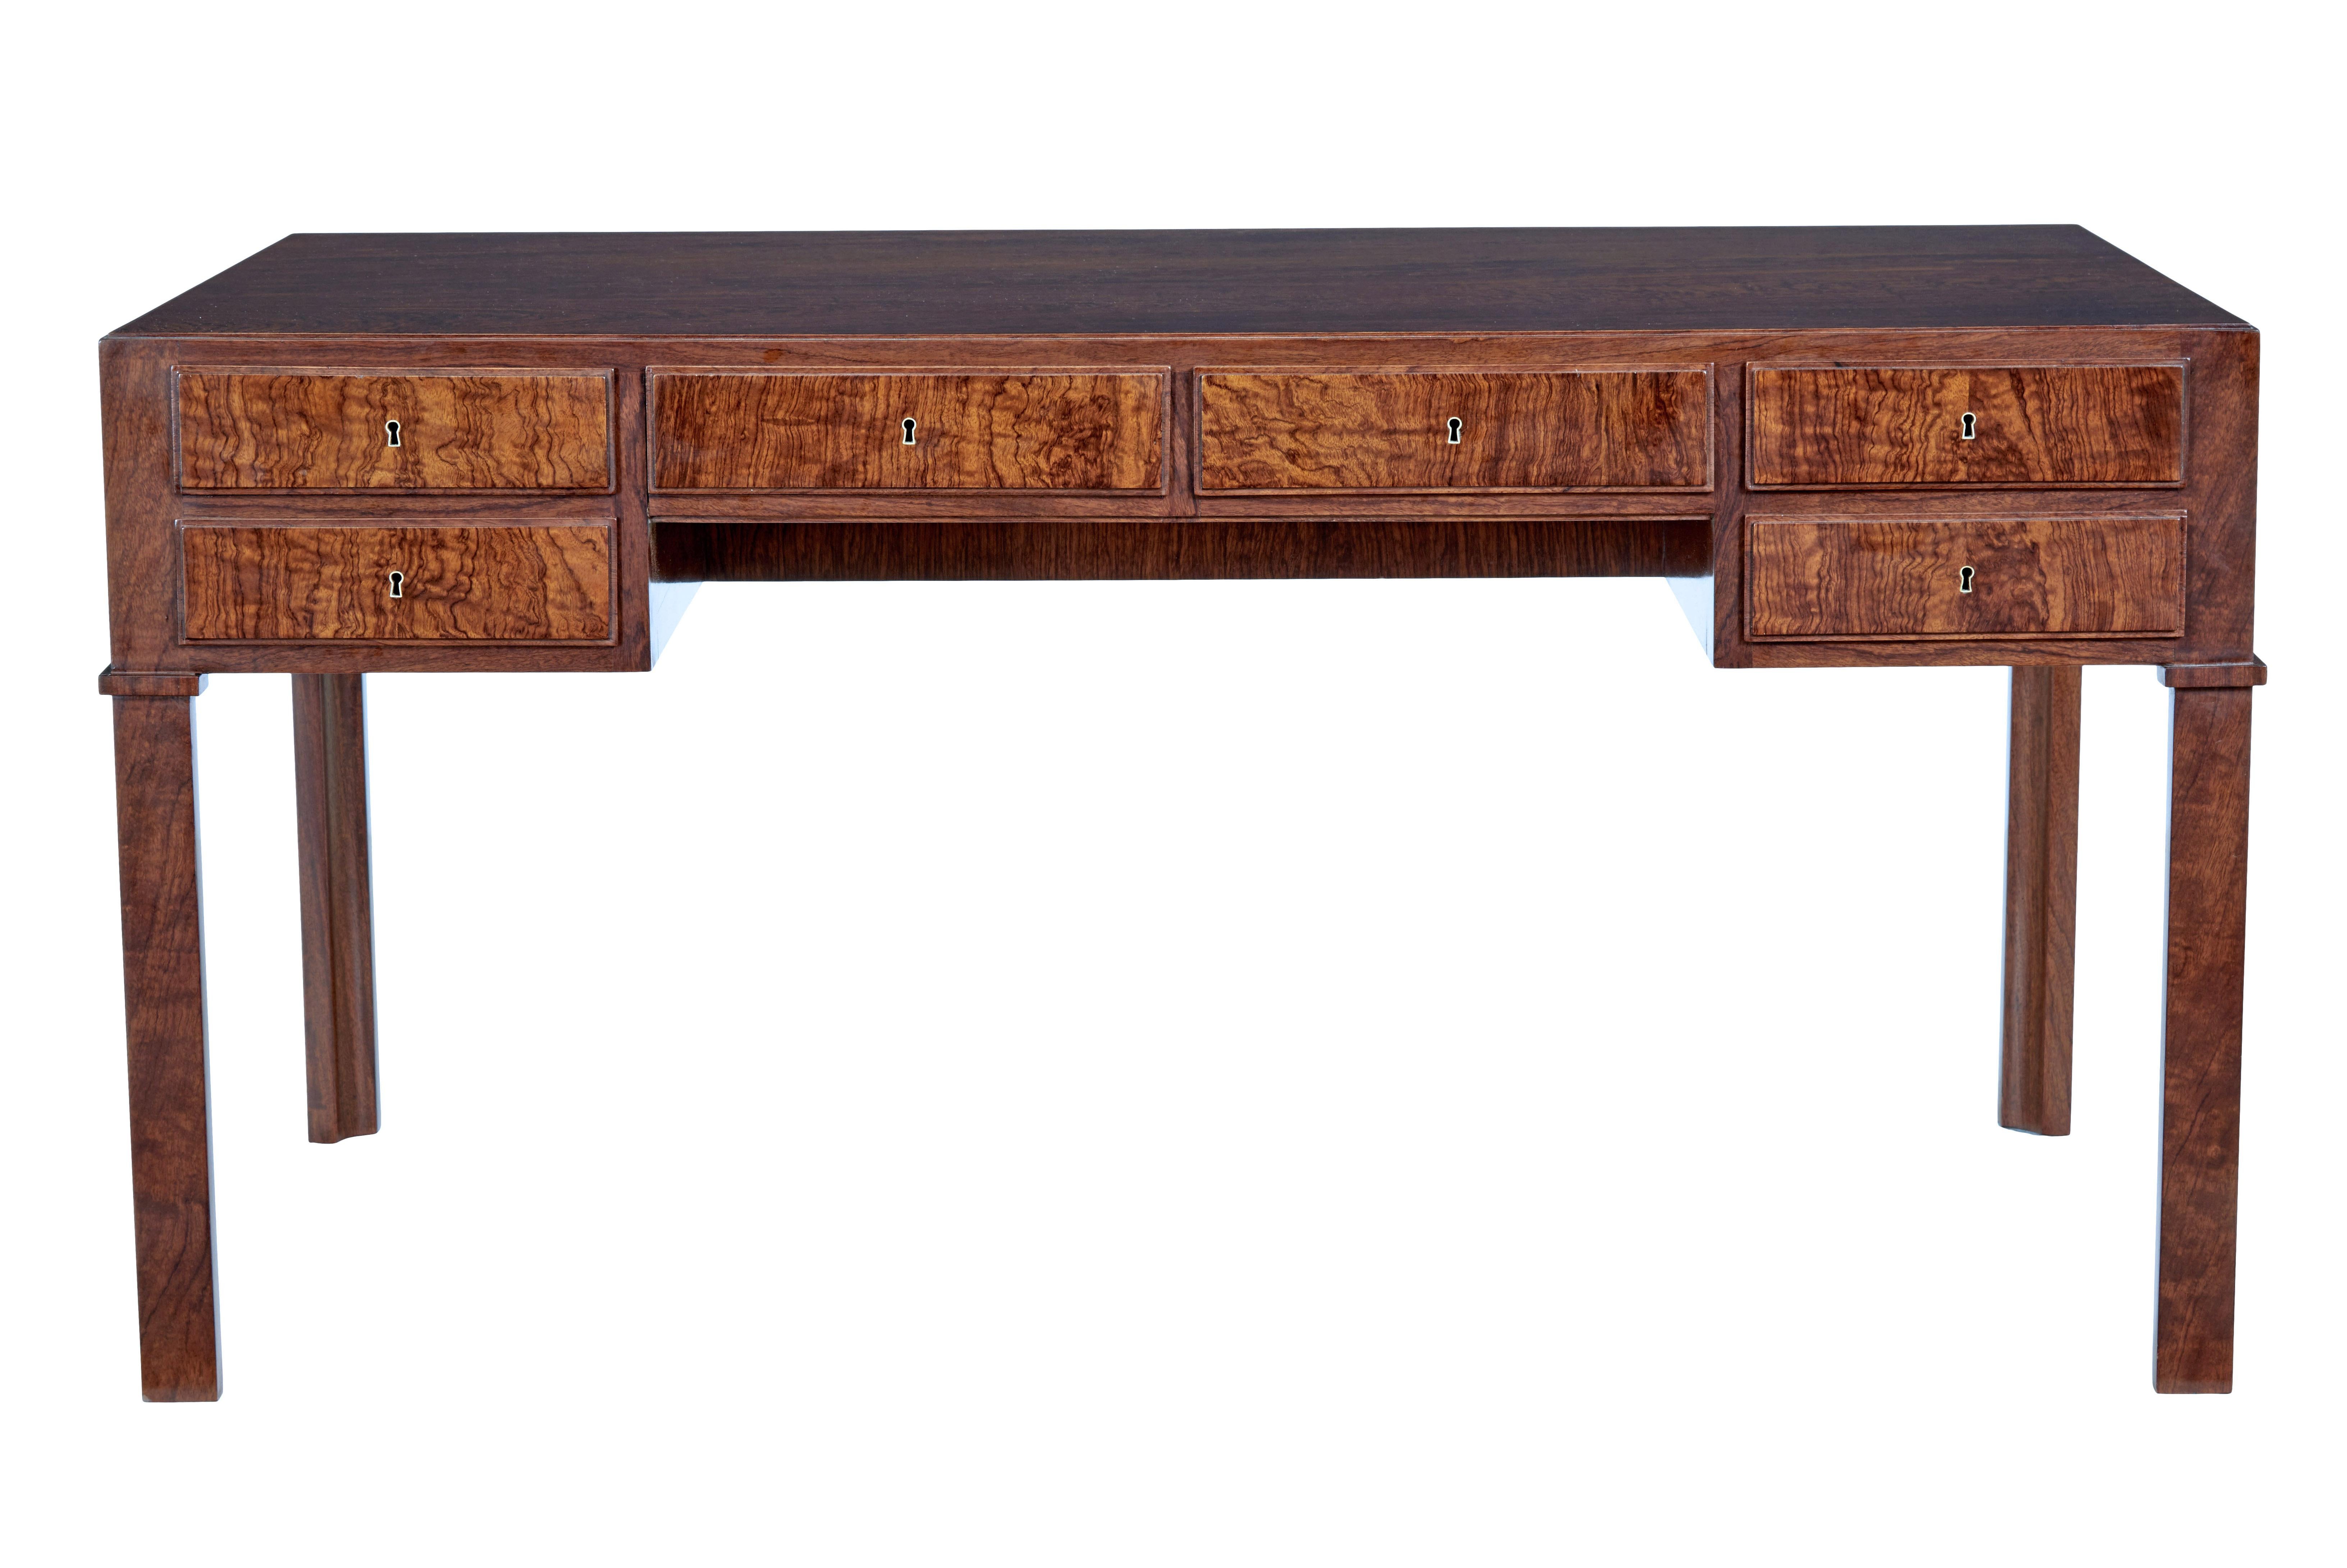 Danish mid 20th century burr walnut desk circa 1950.

We are please to offer this desk which is of the highest quality. 

Stunning top with a single veneer covering the whole writing surface. Veneered to the reverse making this desk free